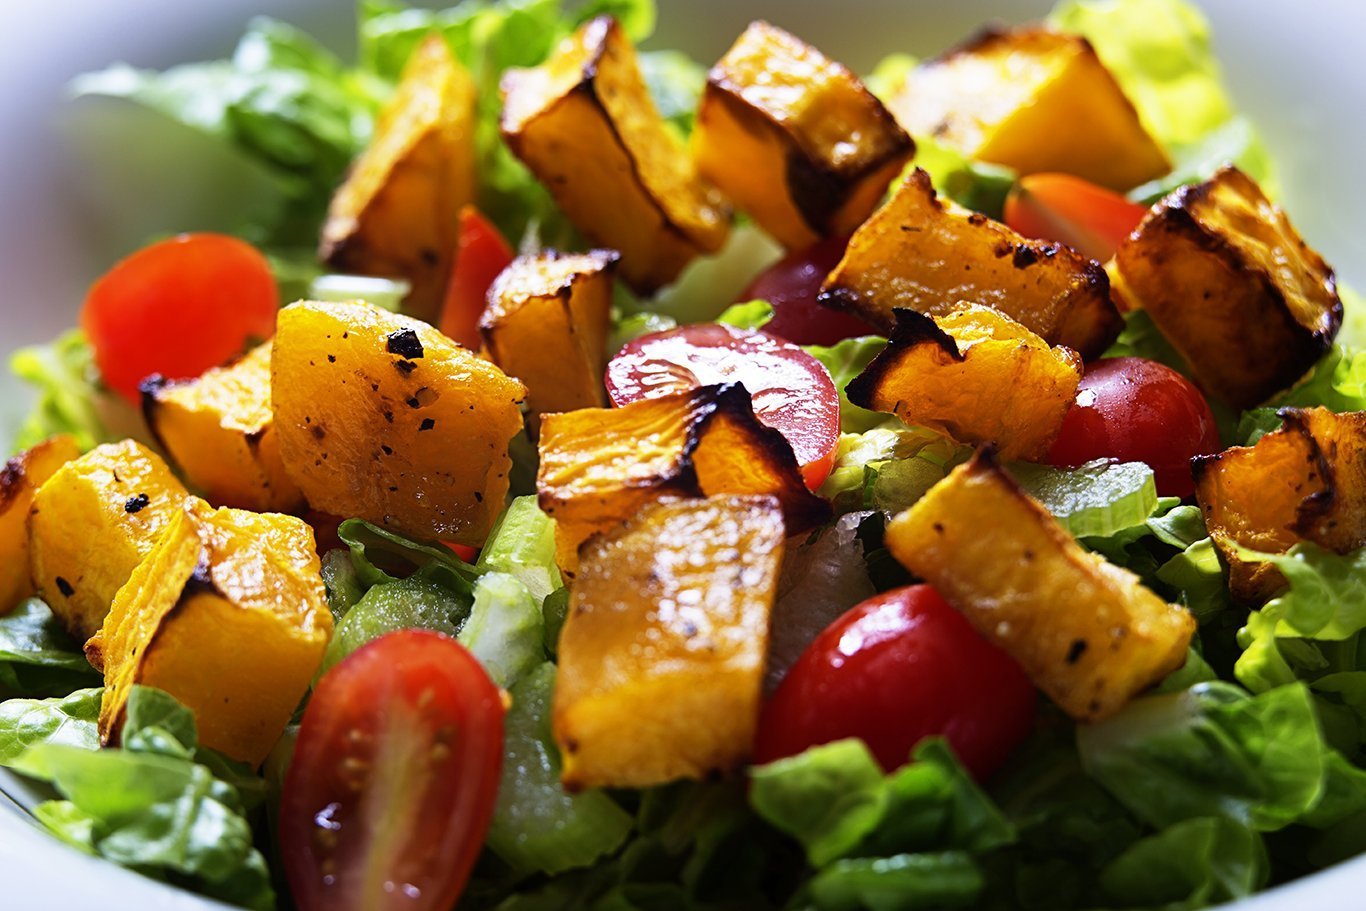 Roasted Butternut Squash and Tomatoes Salad with Cranberry-Orange Vinaigrette